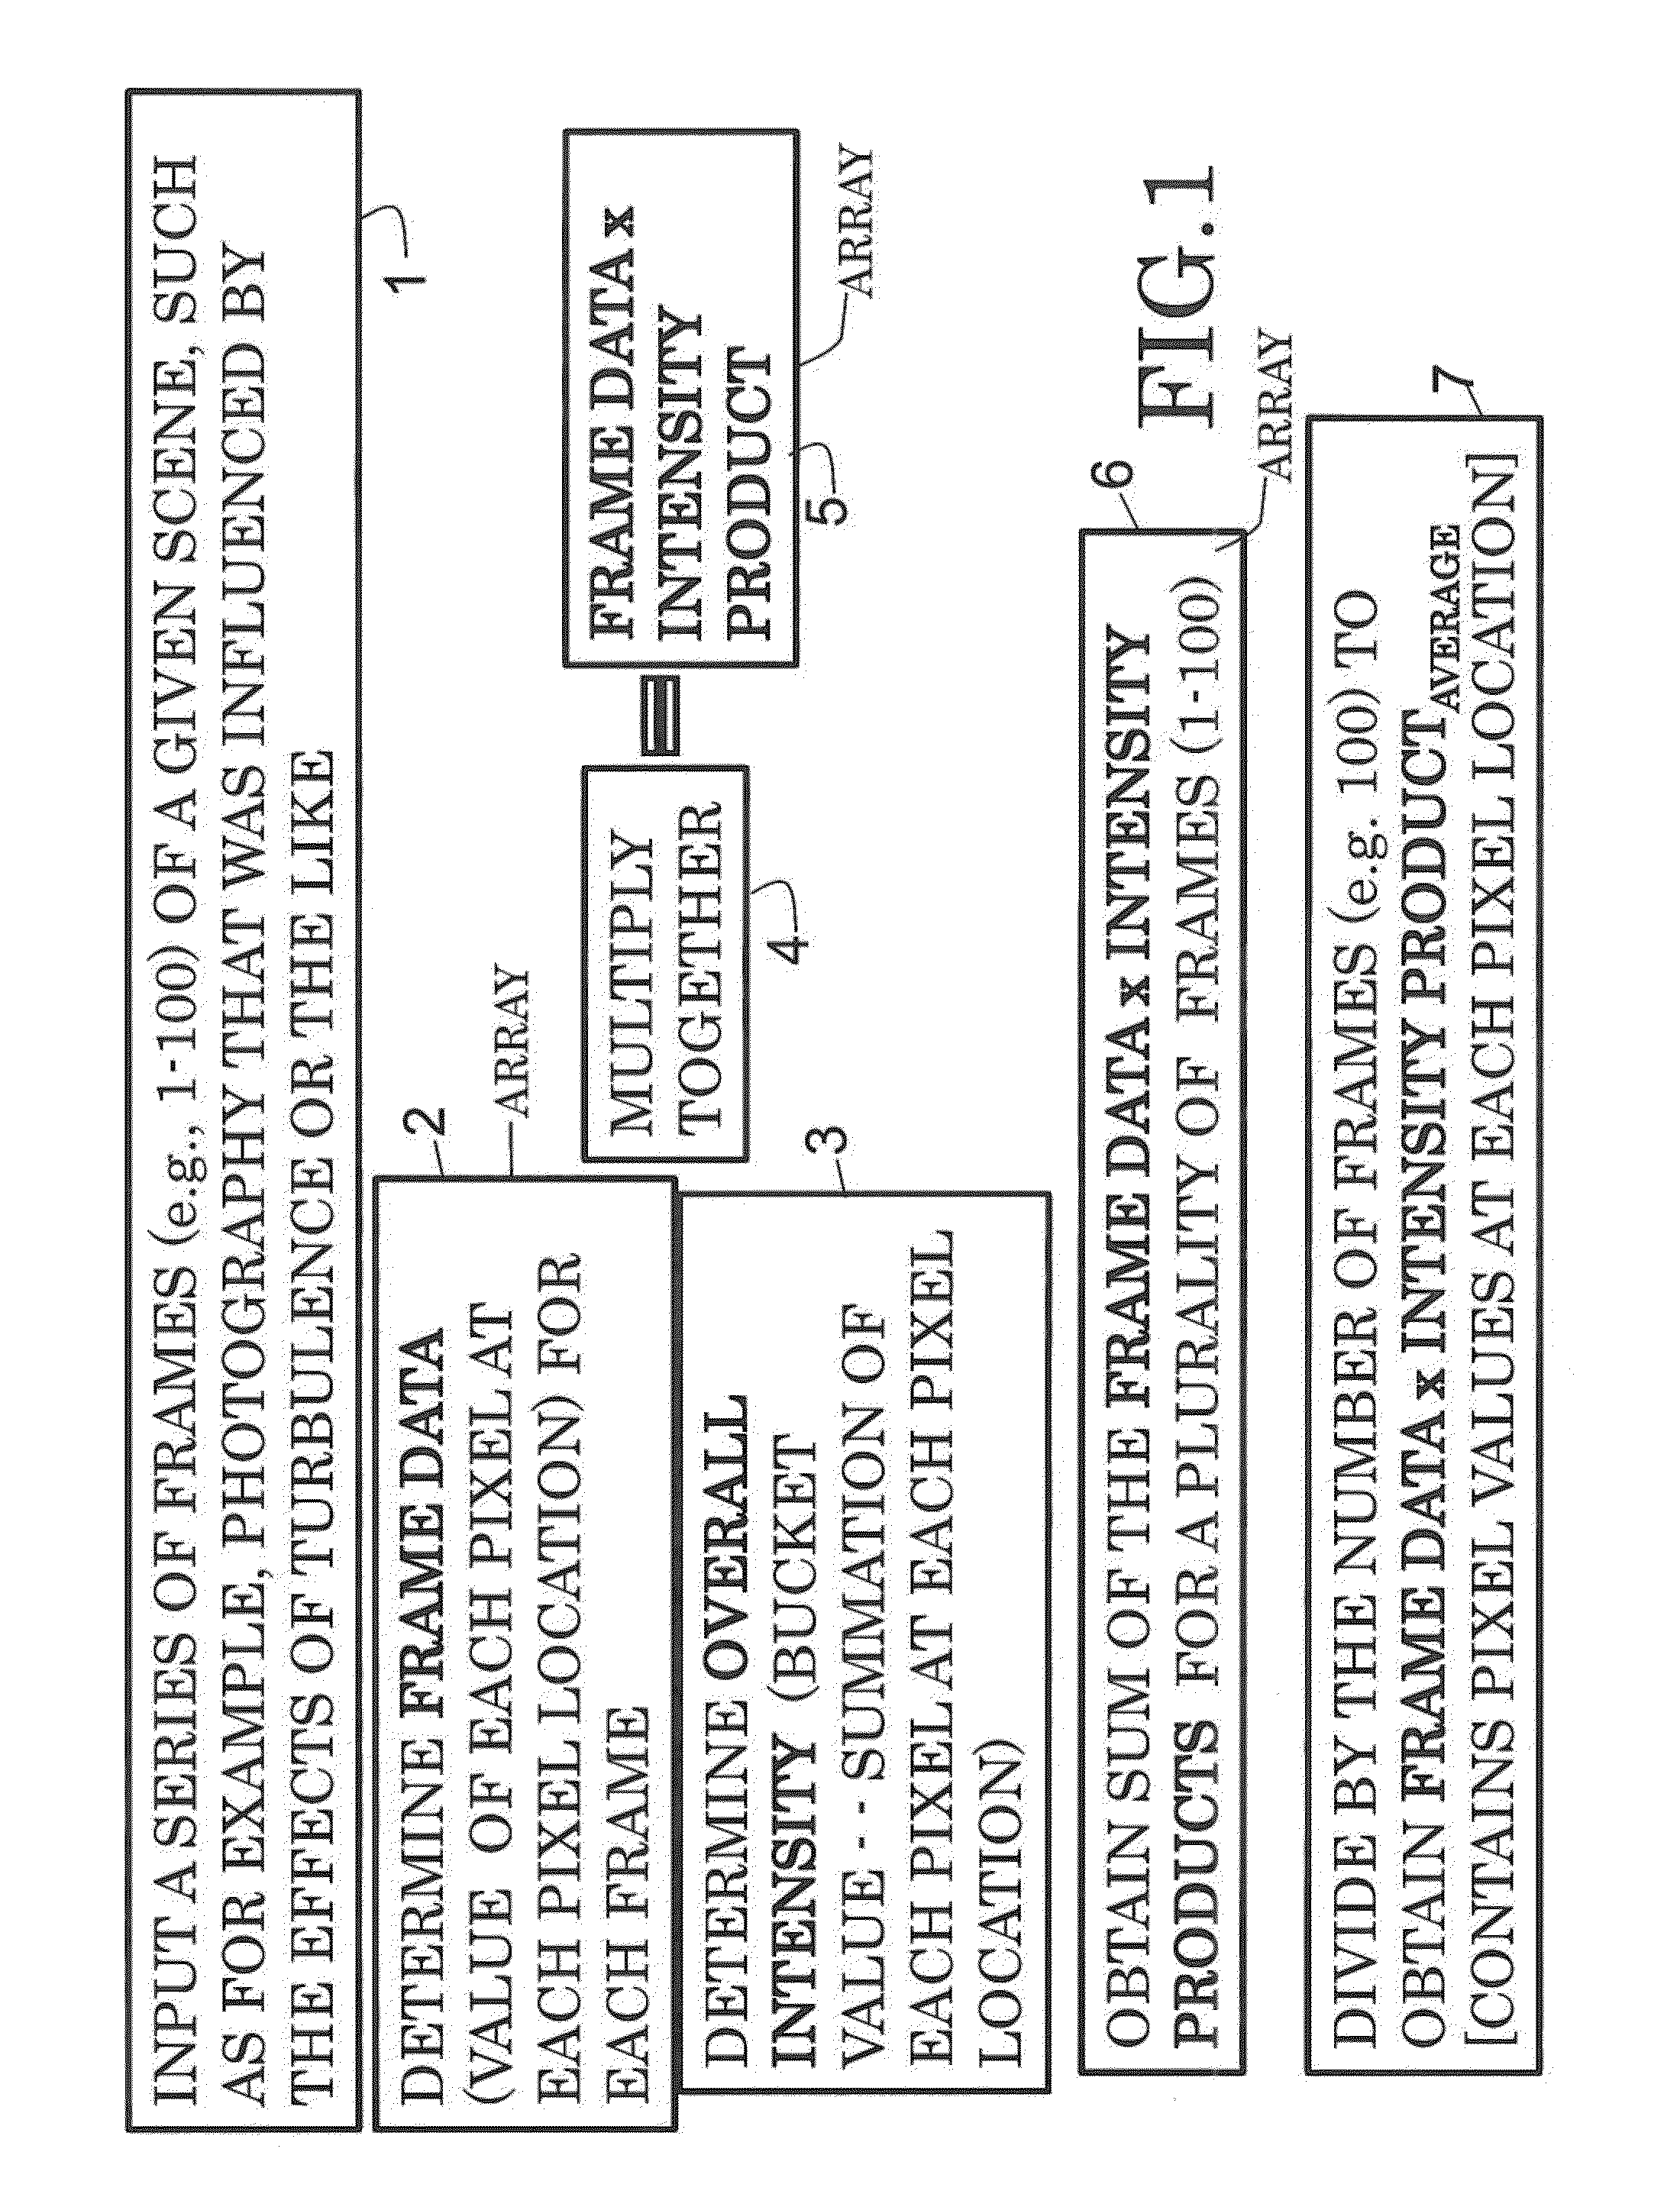 System and Method for Image Enhancement and Improvement